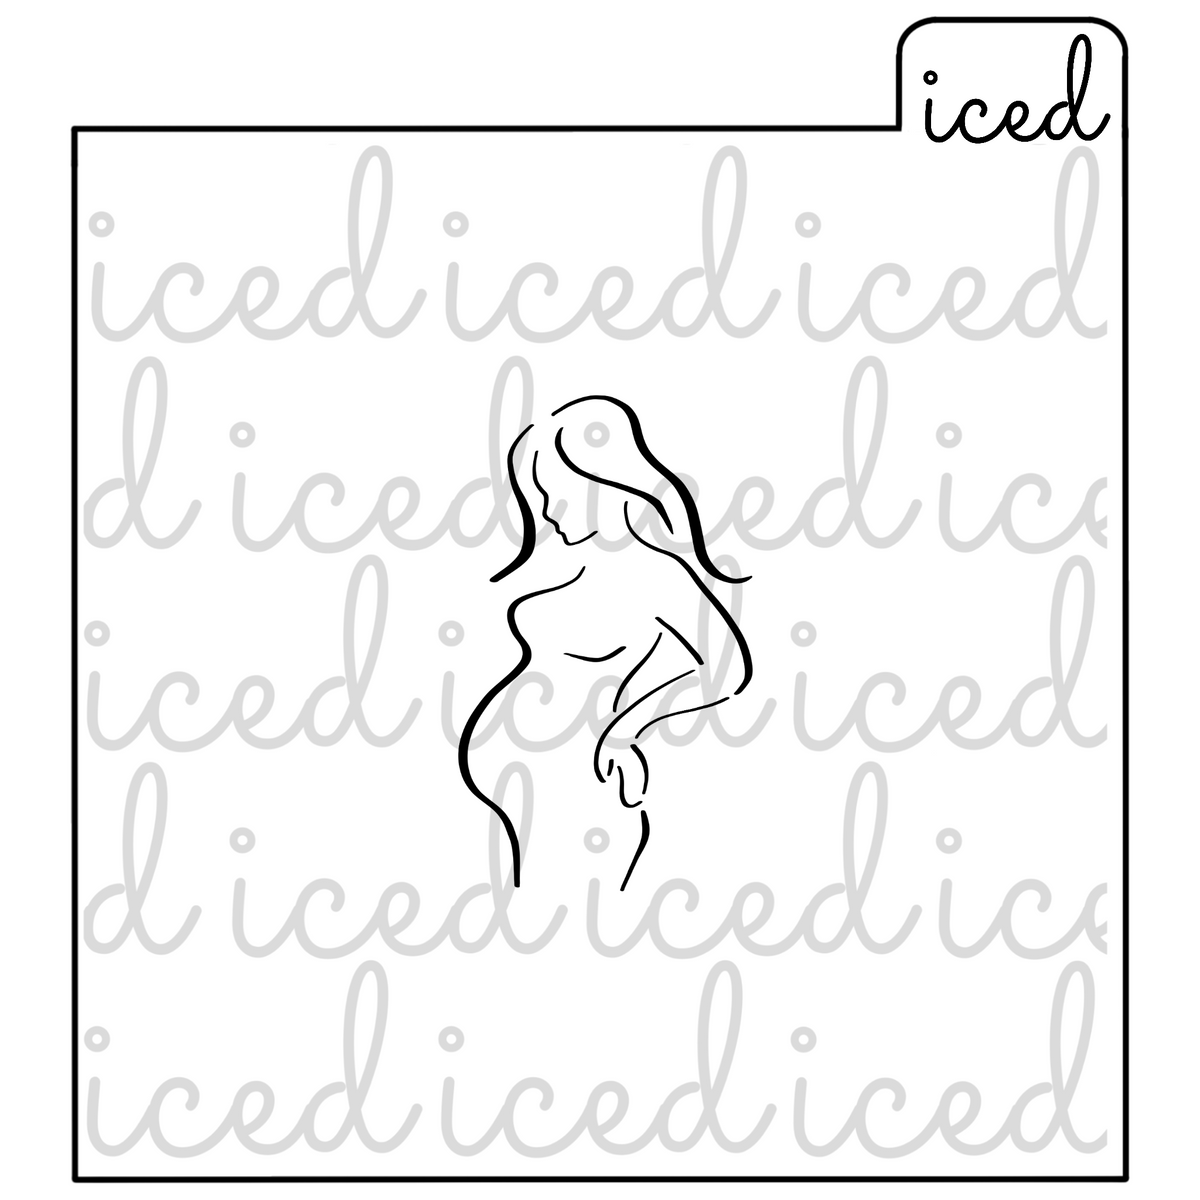 Pregnant Woman Outline Stencil Iced